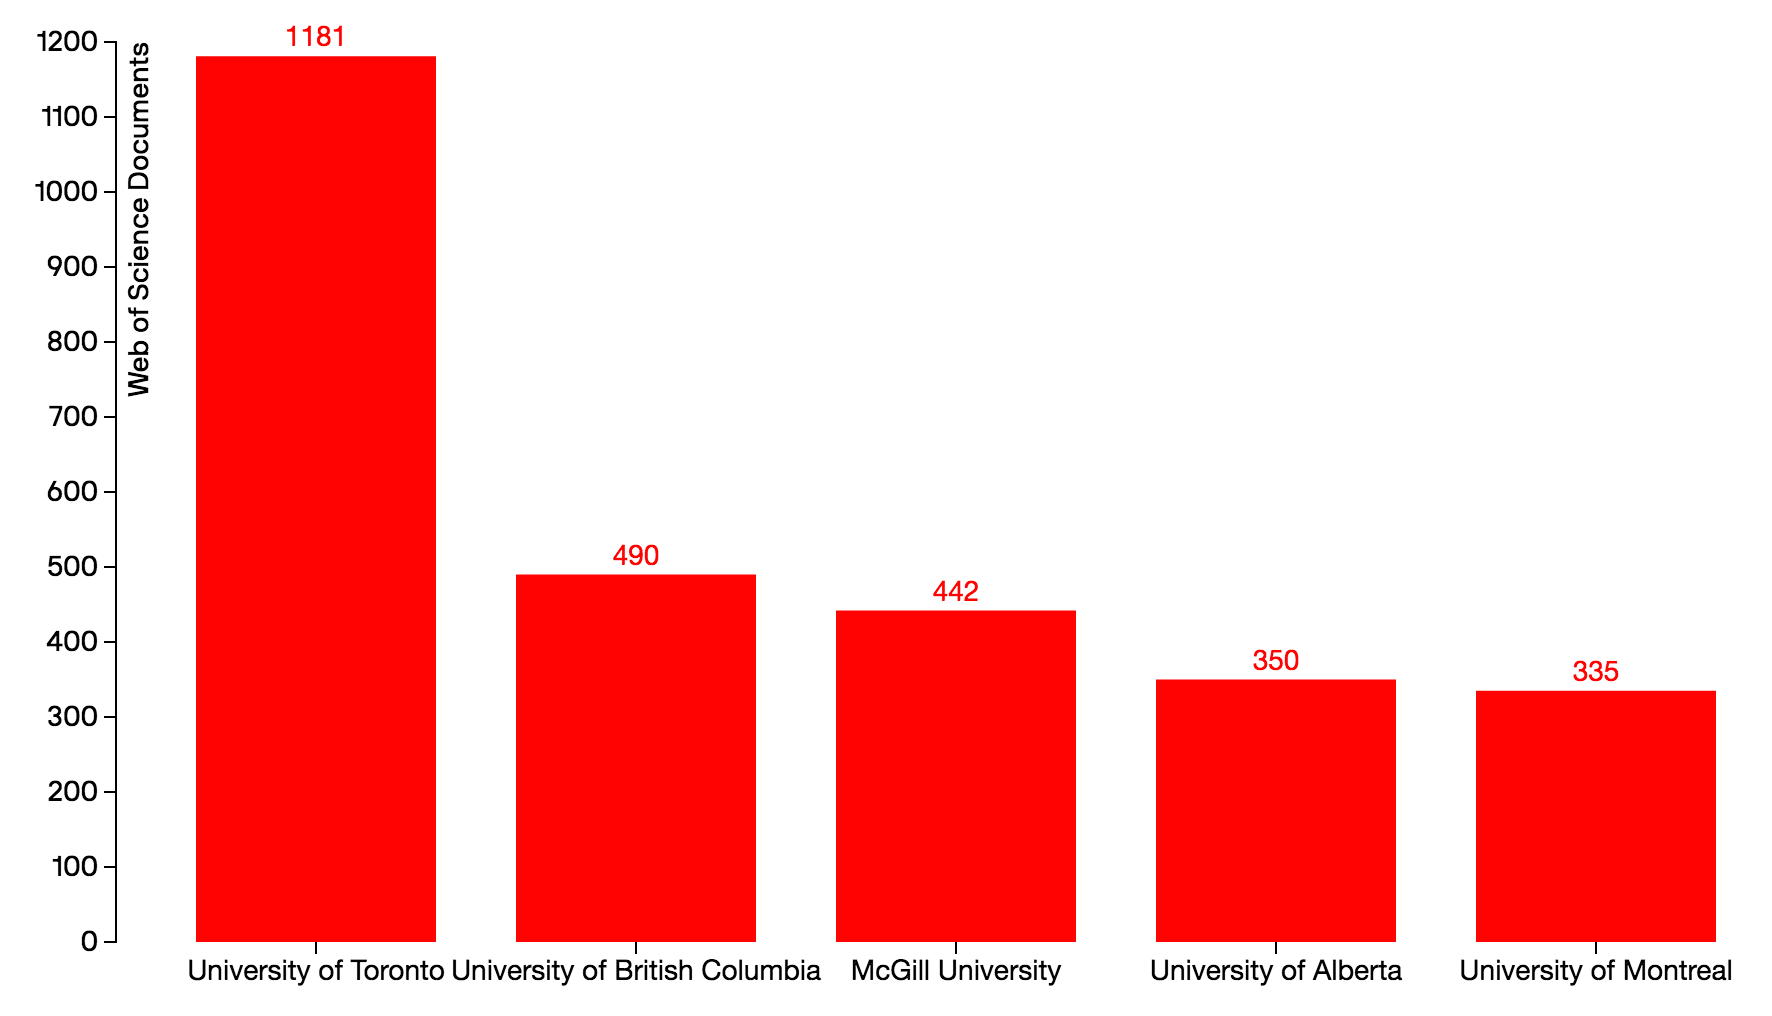 Number of Articles in Top Journals, 2015 Canada Top 5 Organizations: U of T, UBC, McGill, U of A, University of Montreal